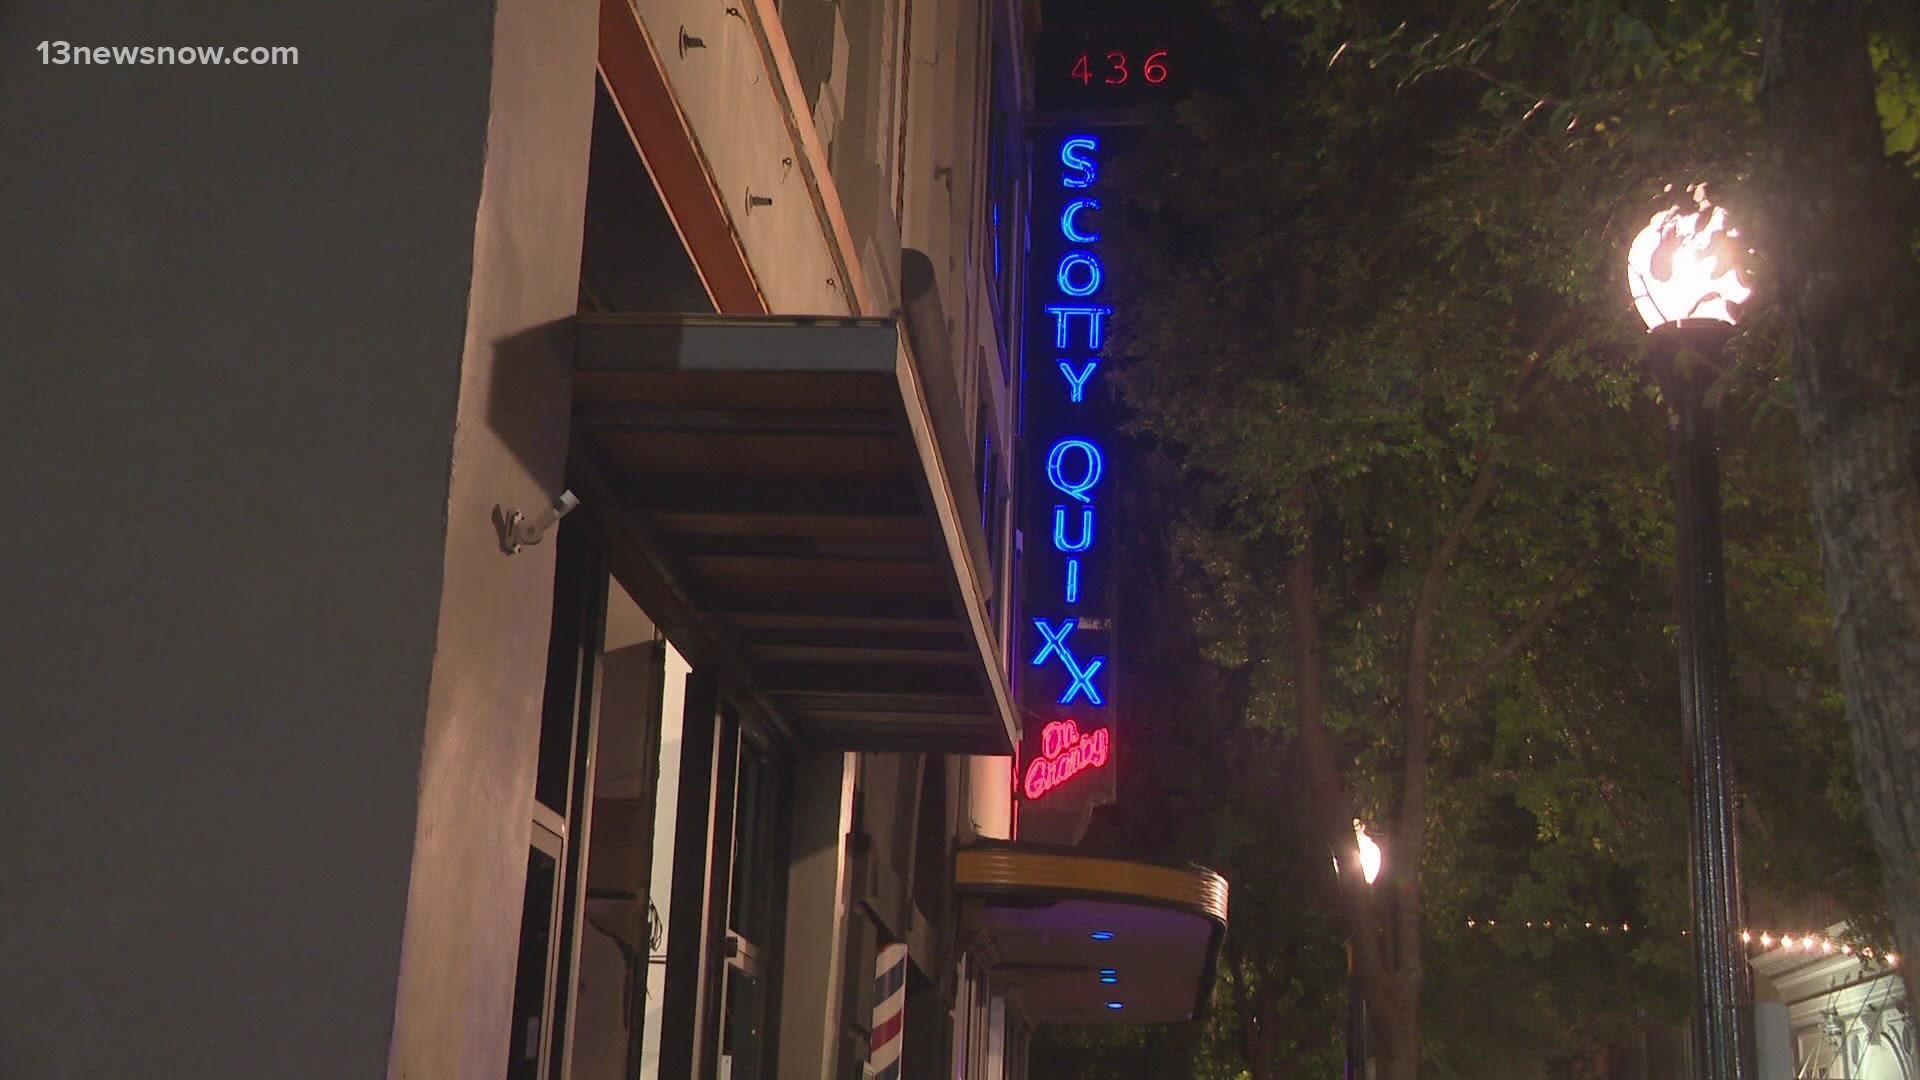 The city took away Scotty Quixx's Conditional Use Permit (CUP) on Sept. 28. This means the business can’t serve alcohol or stay open until 2 am.